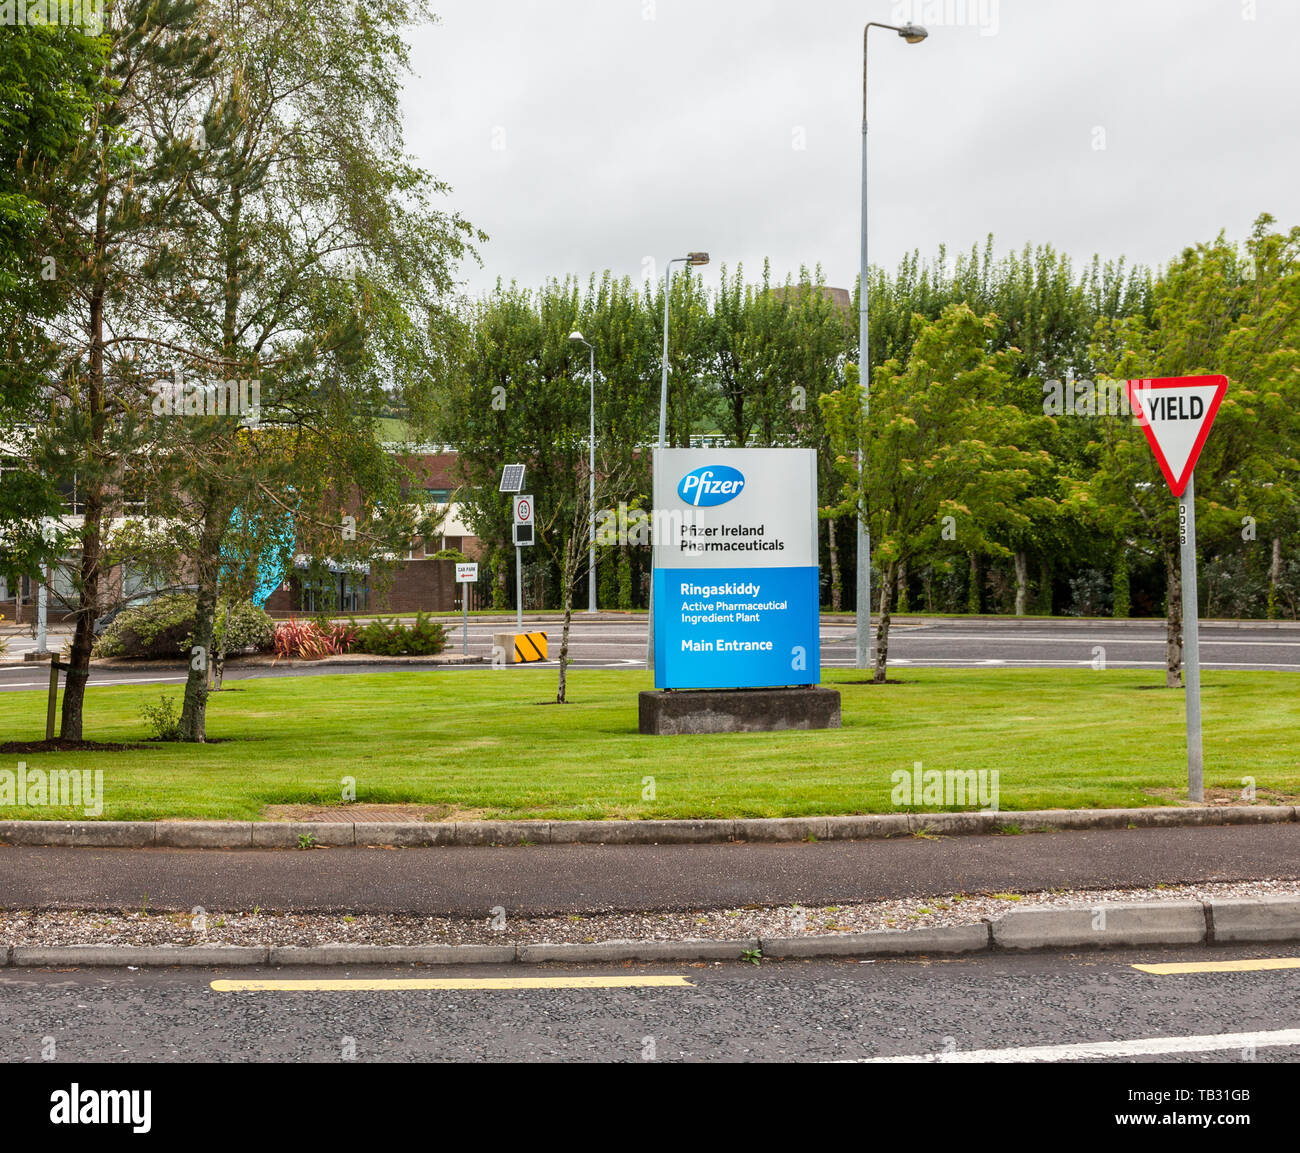 Ringaskiddy, Cork, Ireland. 29th May, 2019. Pfizer Pharmaceuticals are this month marking their 50th anniversary in Ireland. Employment has grown from Stock Photo